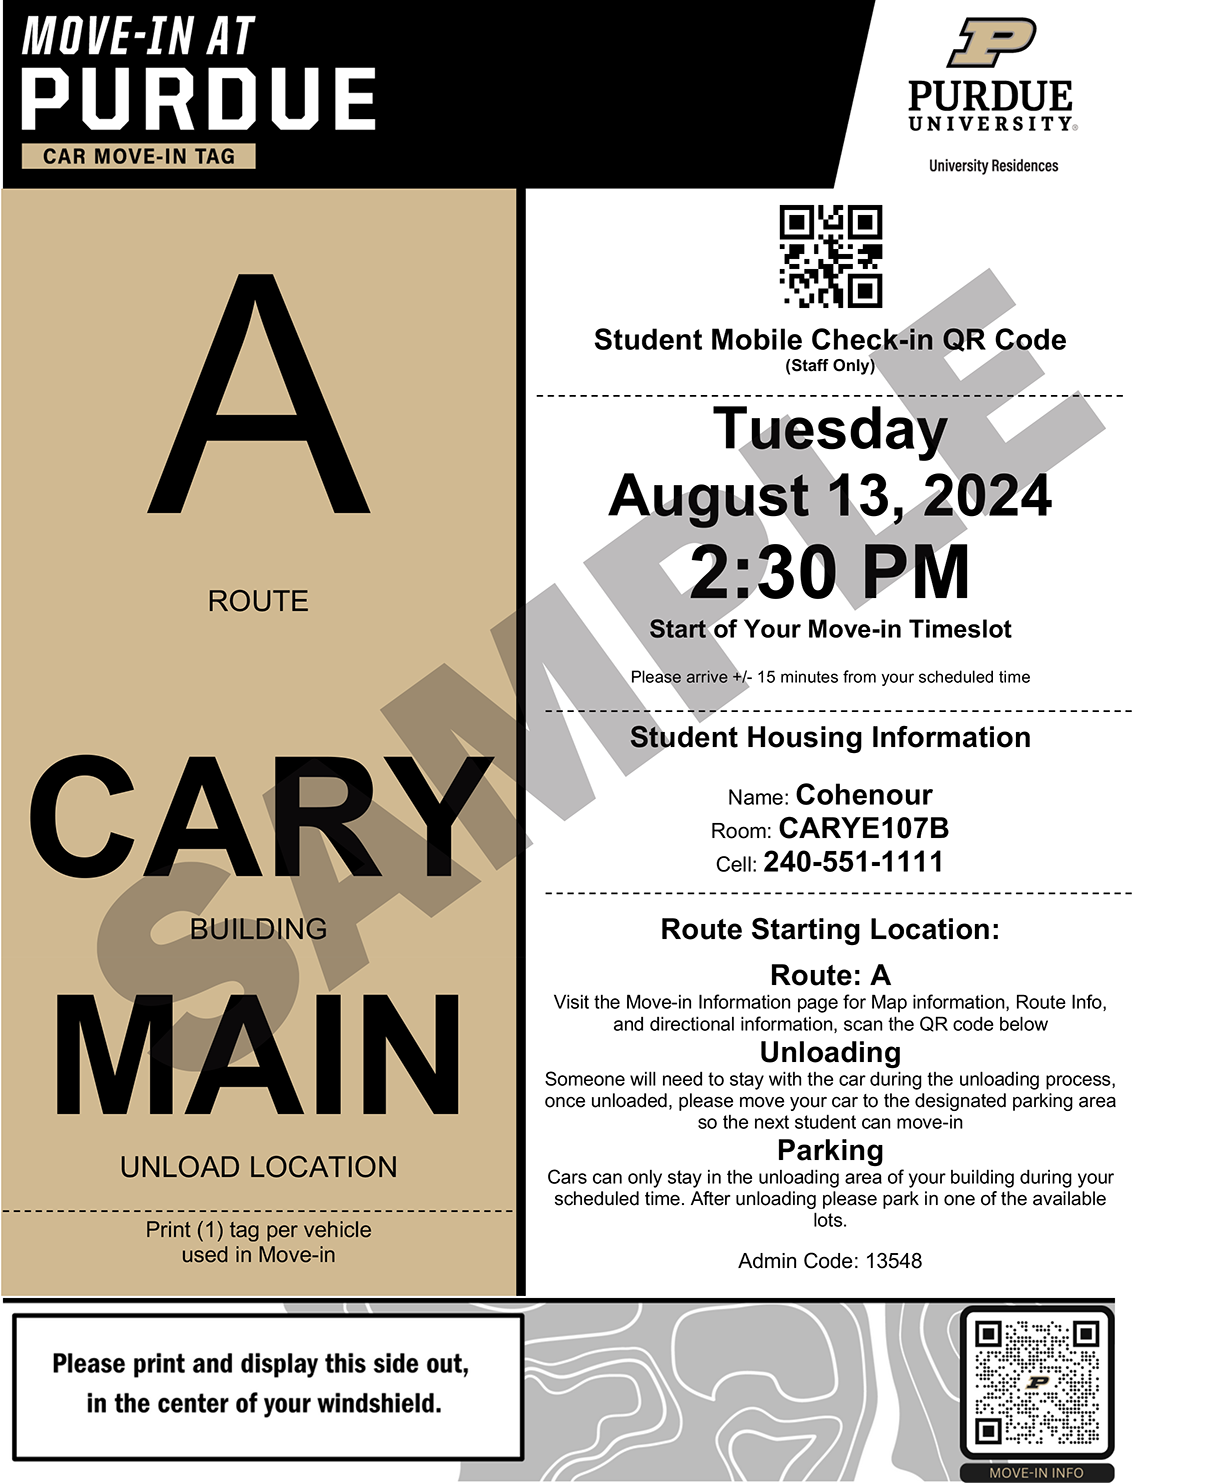 Sample image of a Purdue Move-in hang tag containing informatin about your move-in time, your housing assignment and QR codes to check in.